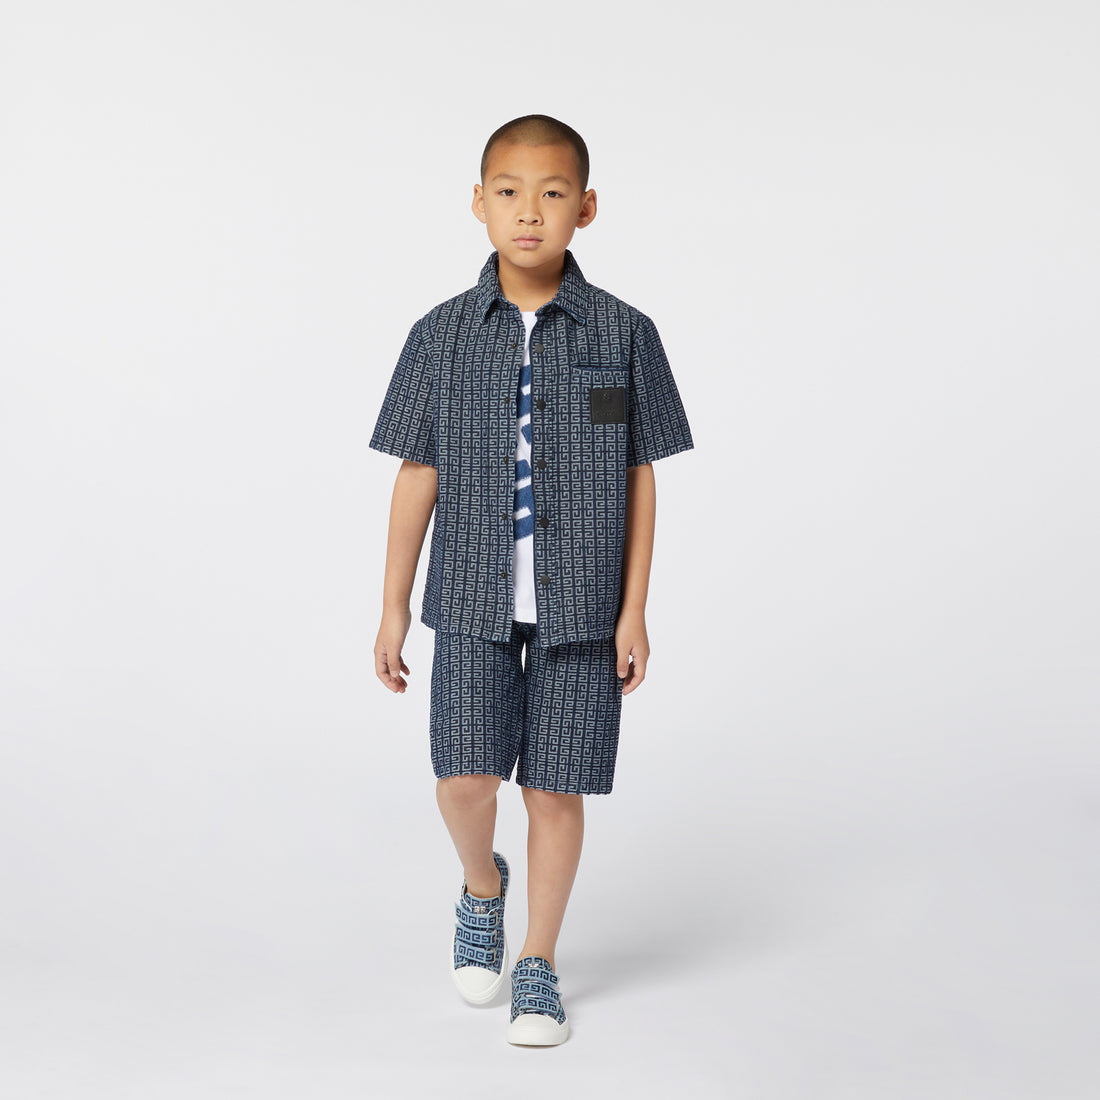 Givenchy Bermuda Shorts Denim Blue- Trendy and Comfortable for Kids | Schools Out